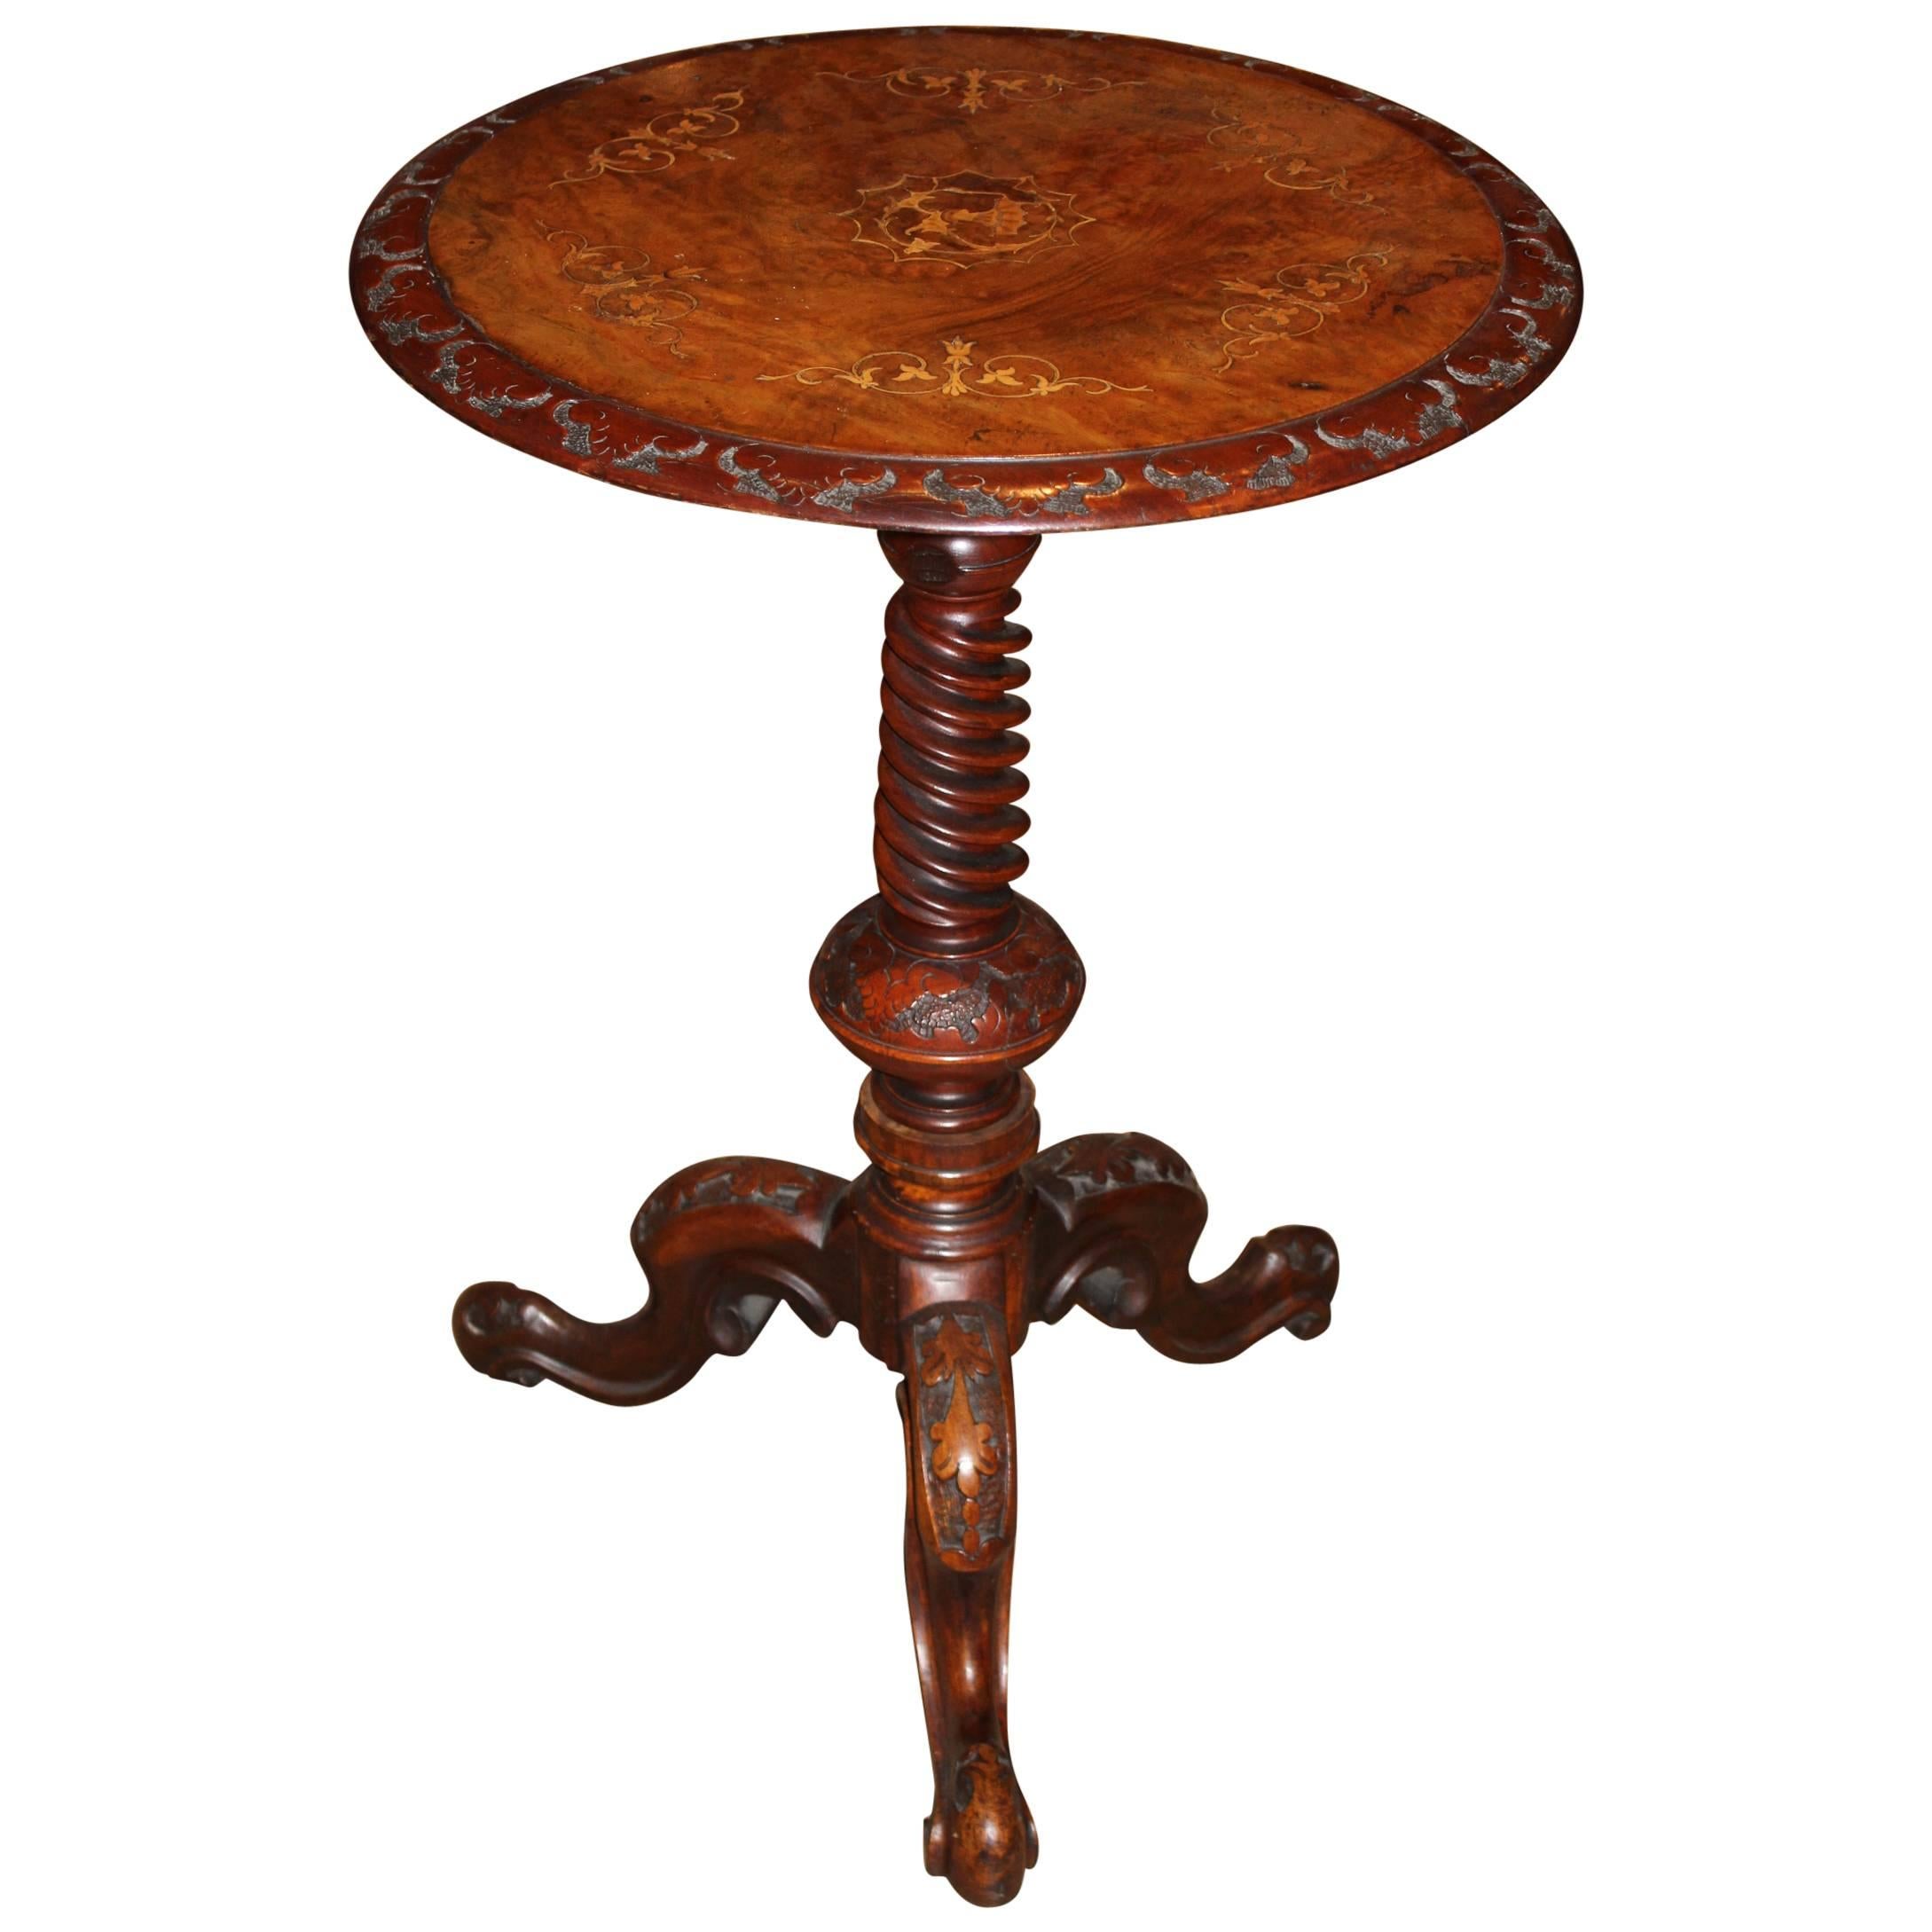 Carved and Inlaid Candle Stand with Marquetry, circa 1860